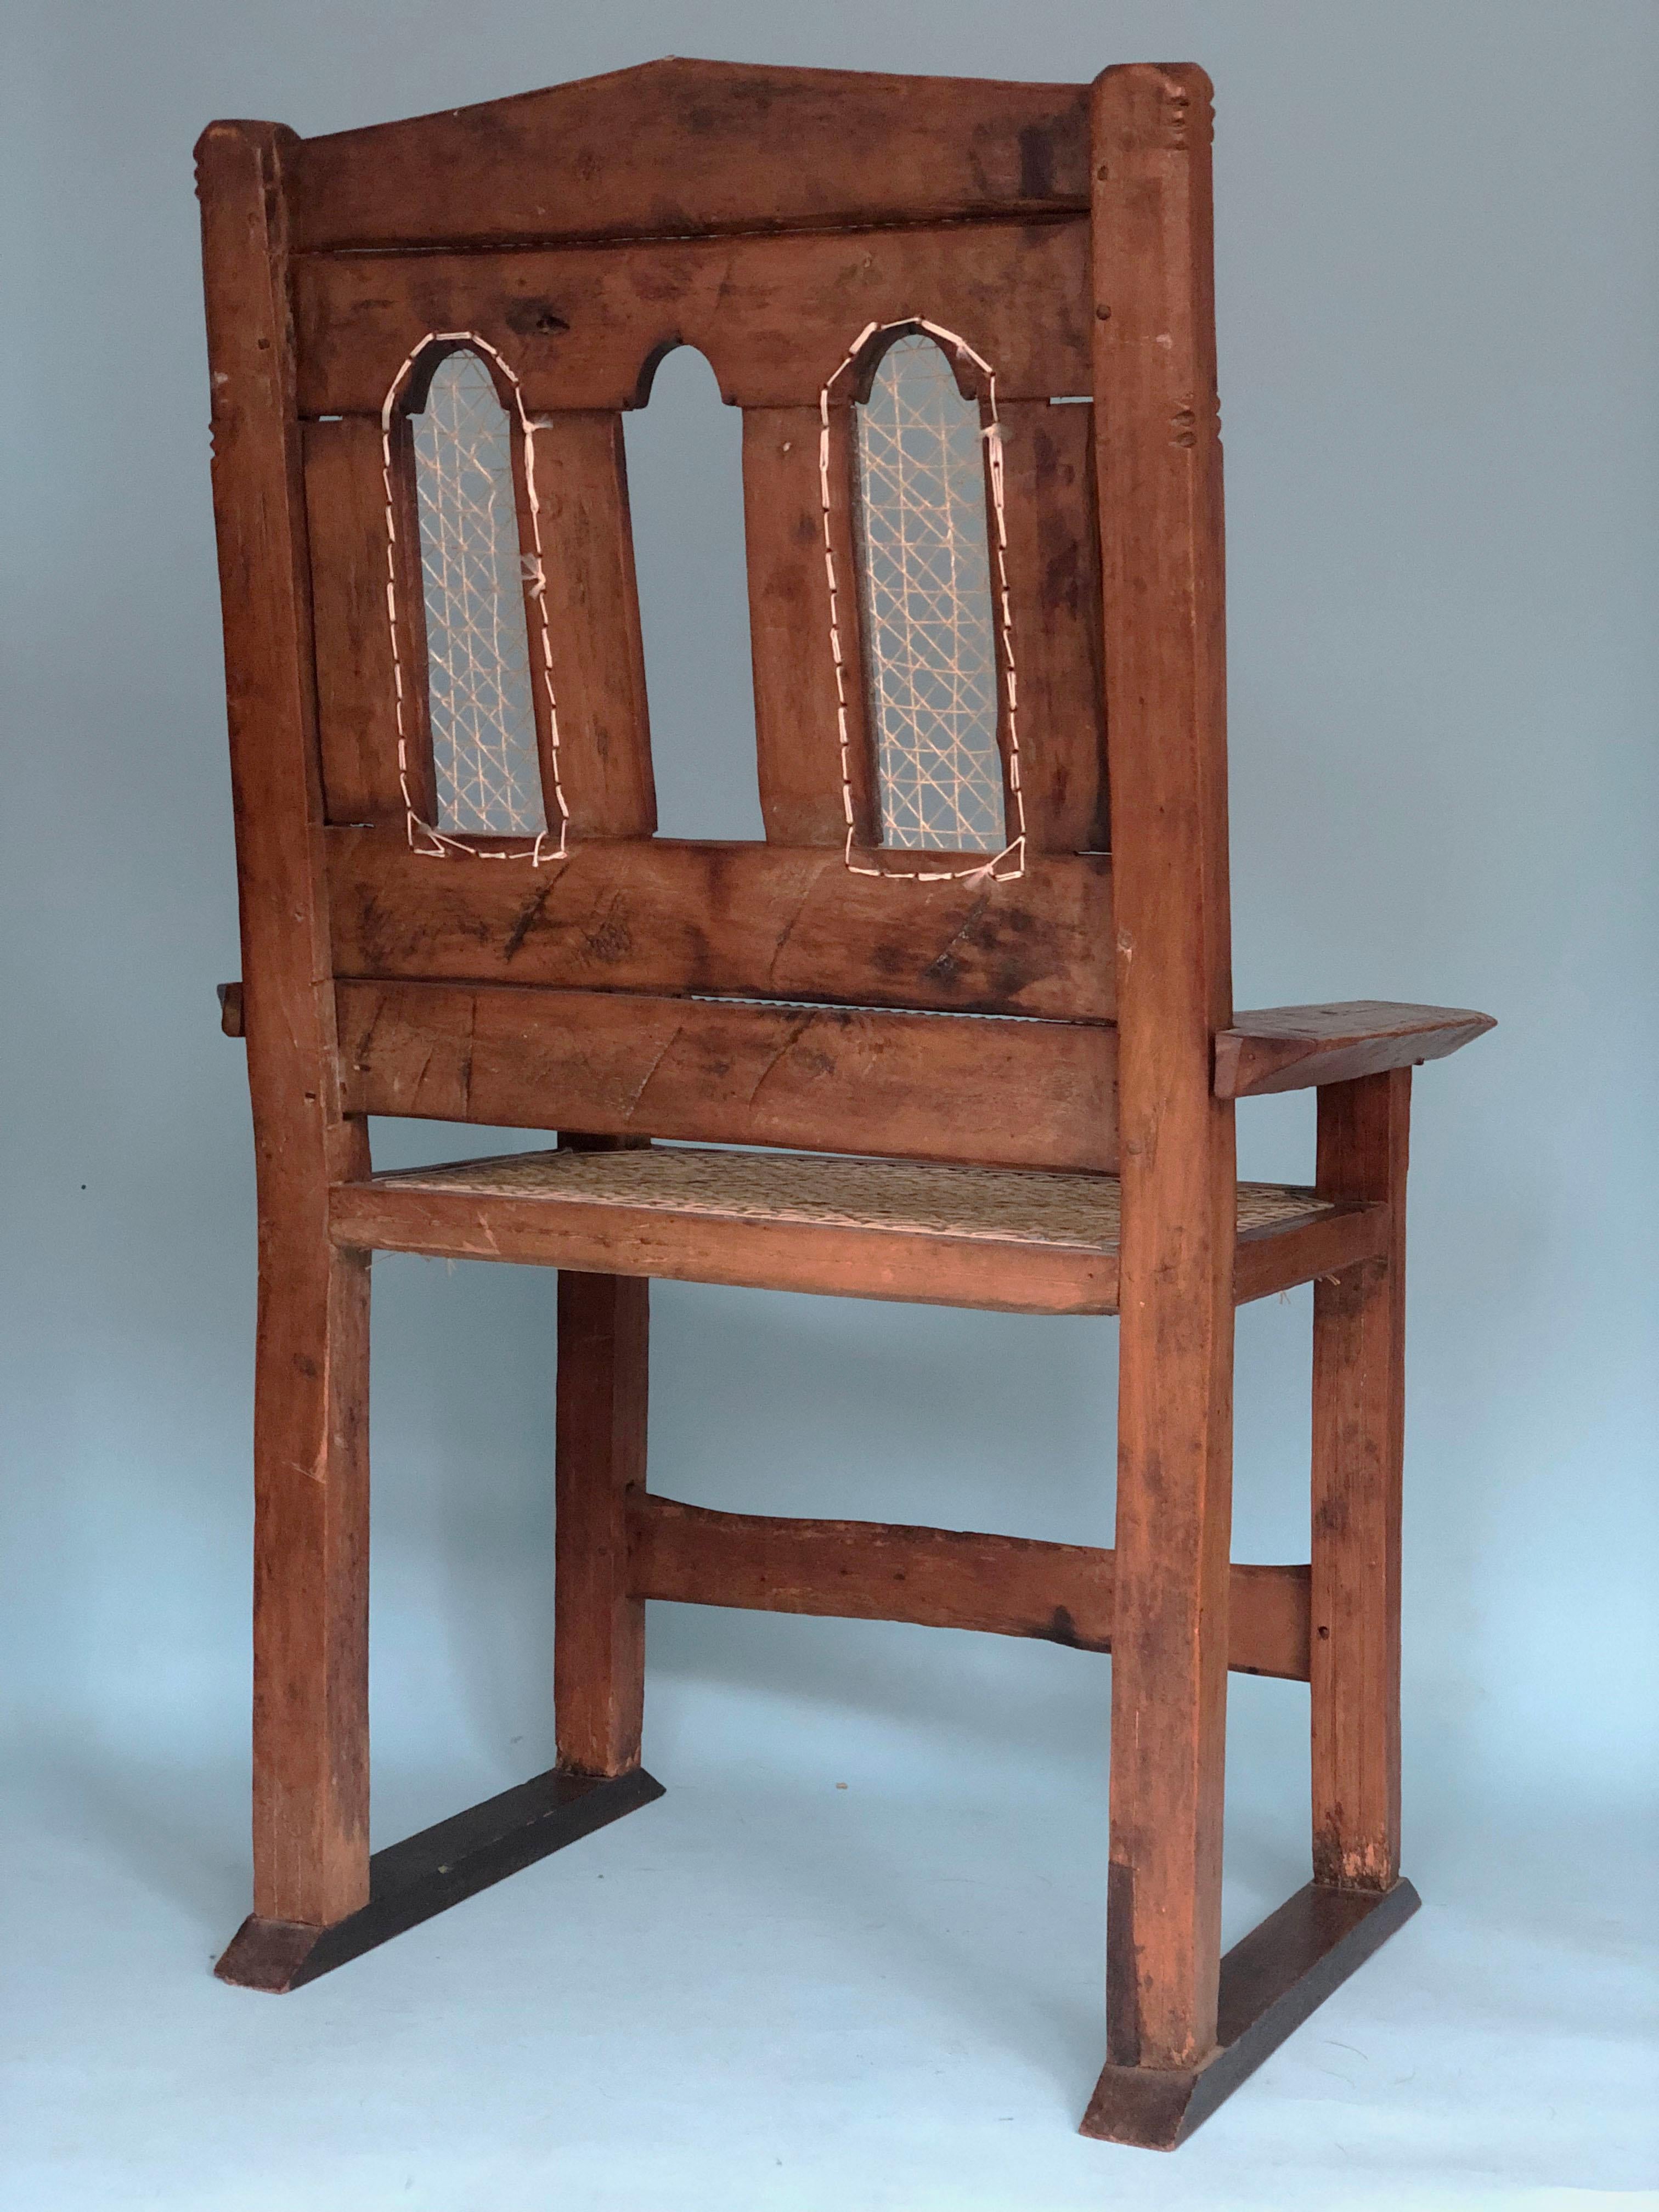 A beautiful hand-carved Indian chair in teak wood. The rich appearance of the chair has been given new rope as the seat and back, as it used to be. A name is engraved in the armrest of the weathered chair.

Object: Armchair
Design: